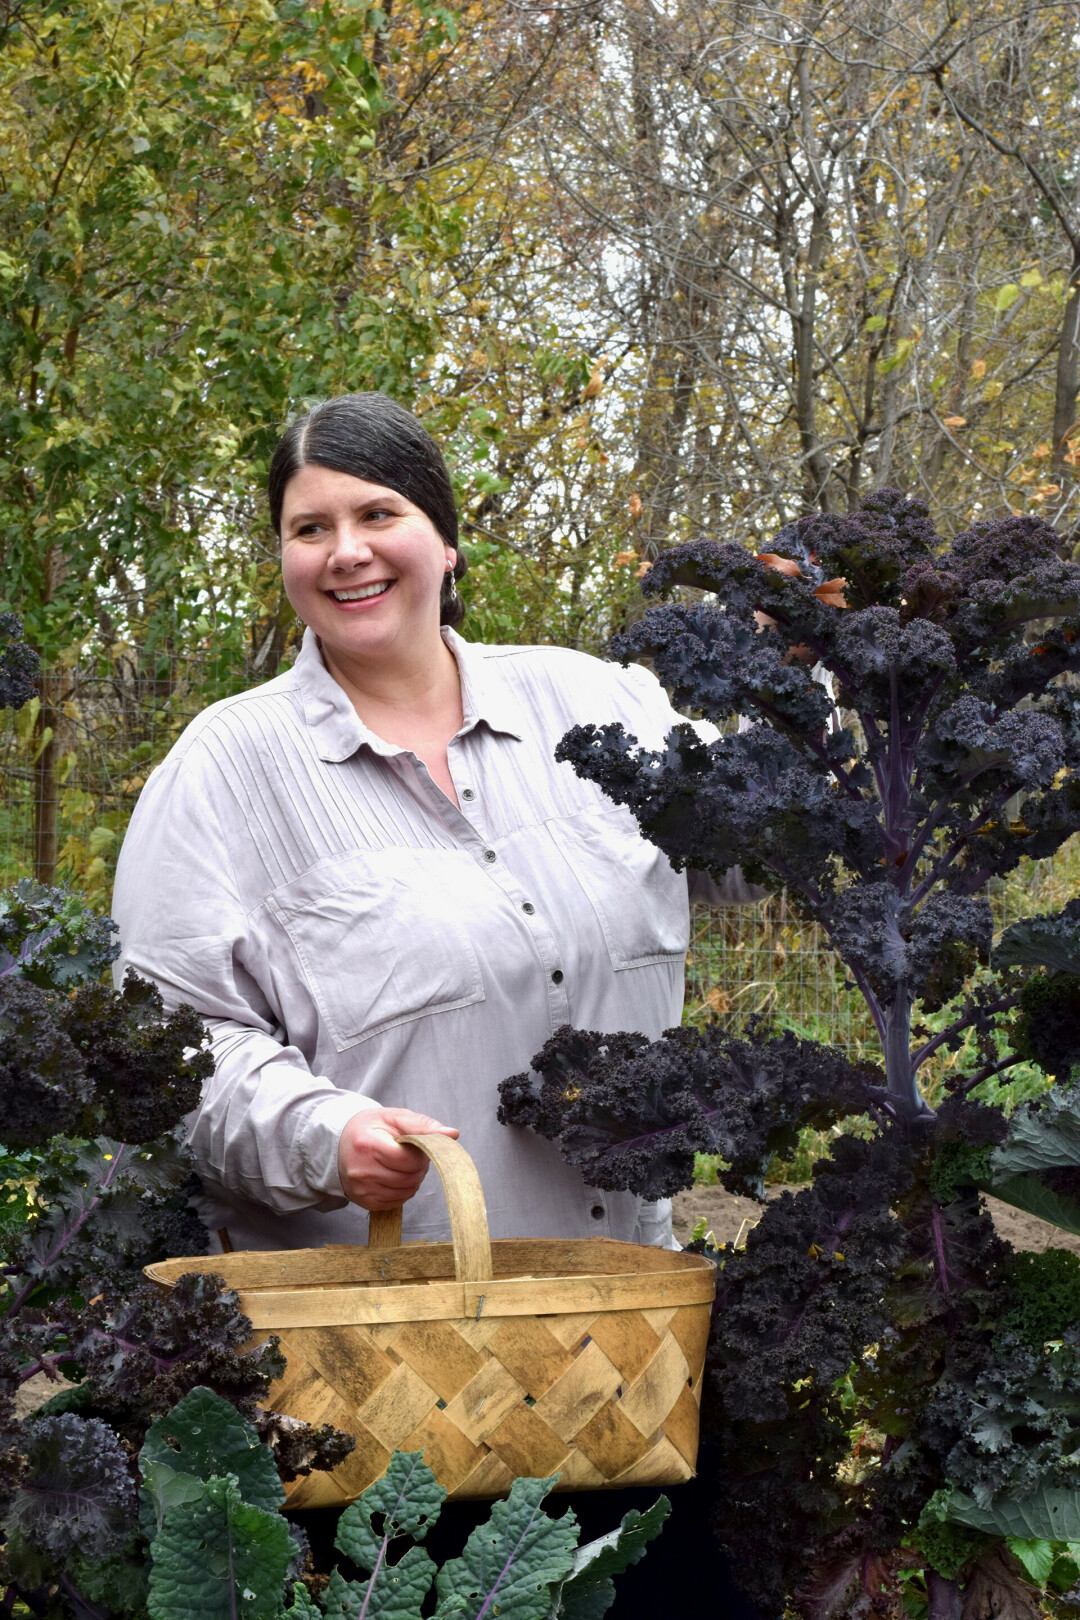 Crystal Schmidt (pictured) loves all things gardening and preserving, and she's sharing her methods in new book.